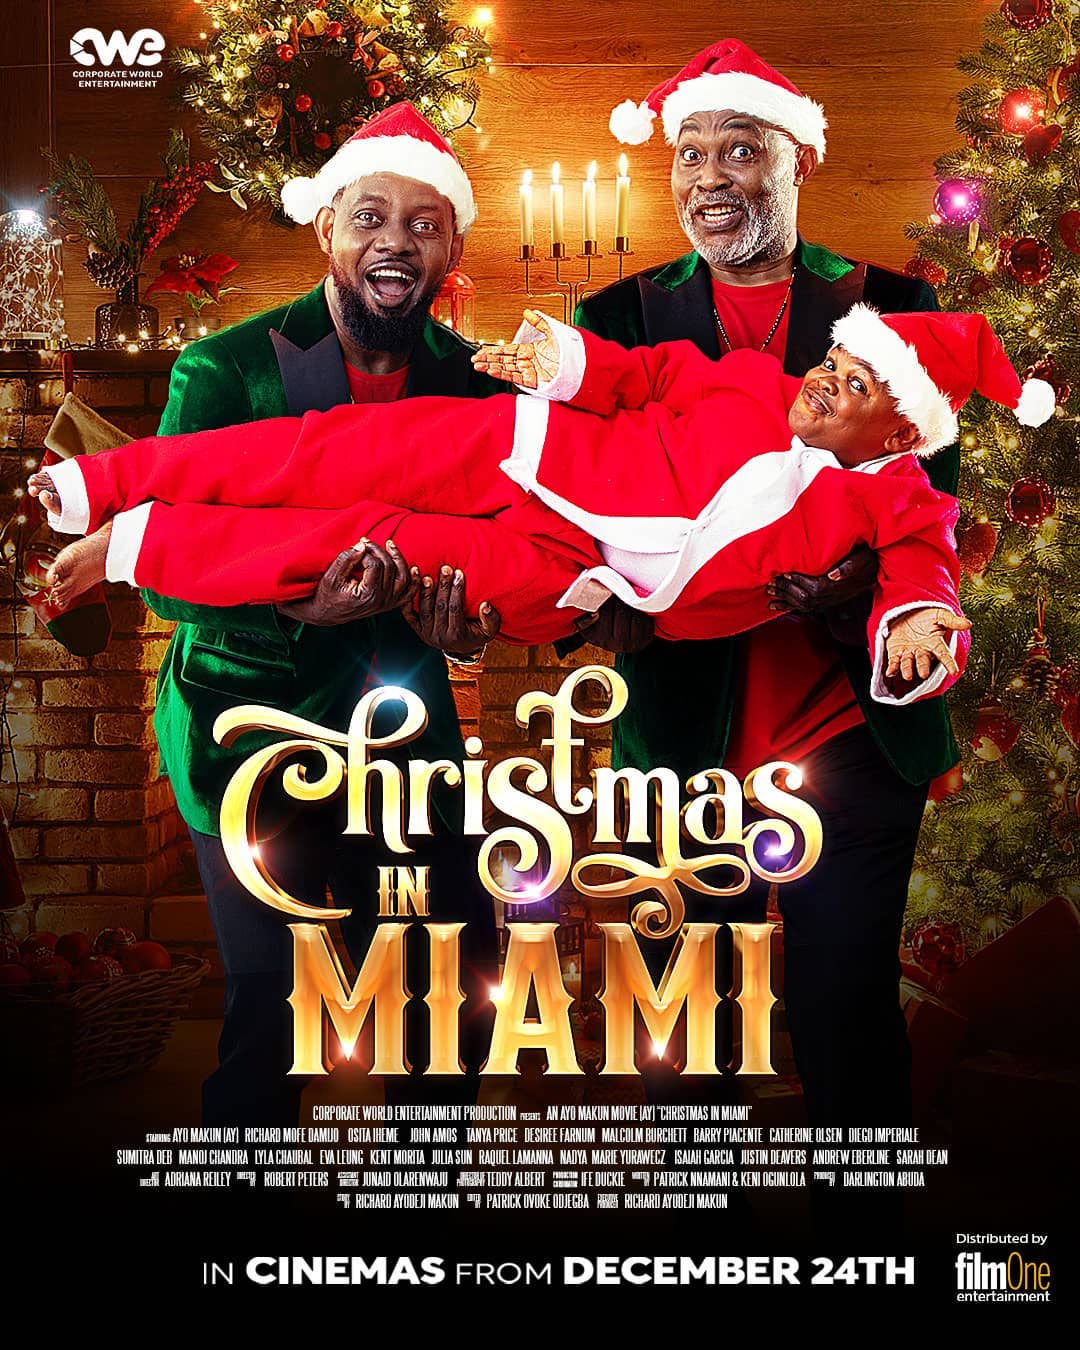 257231074 1732679146922022 2869935212325914582 n - Can AY Makun Break Ribs and Records This December With “Christmas in Miami”